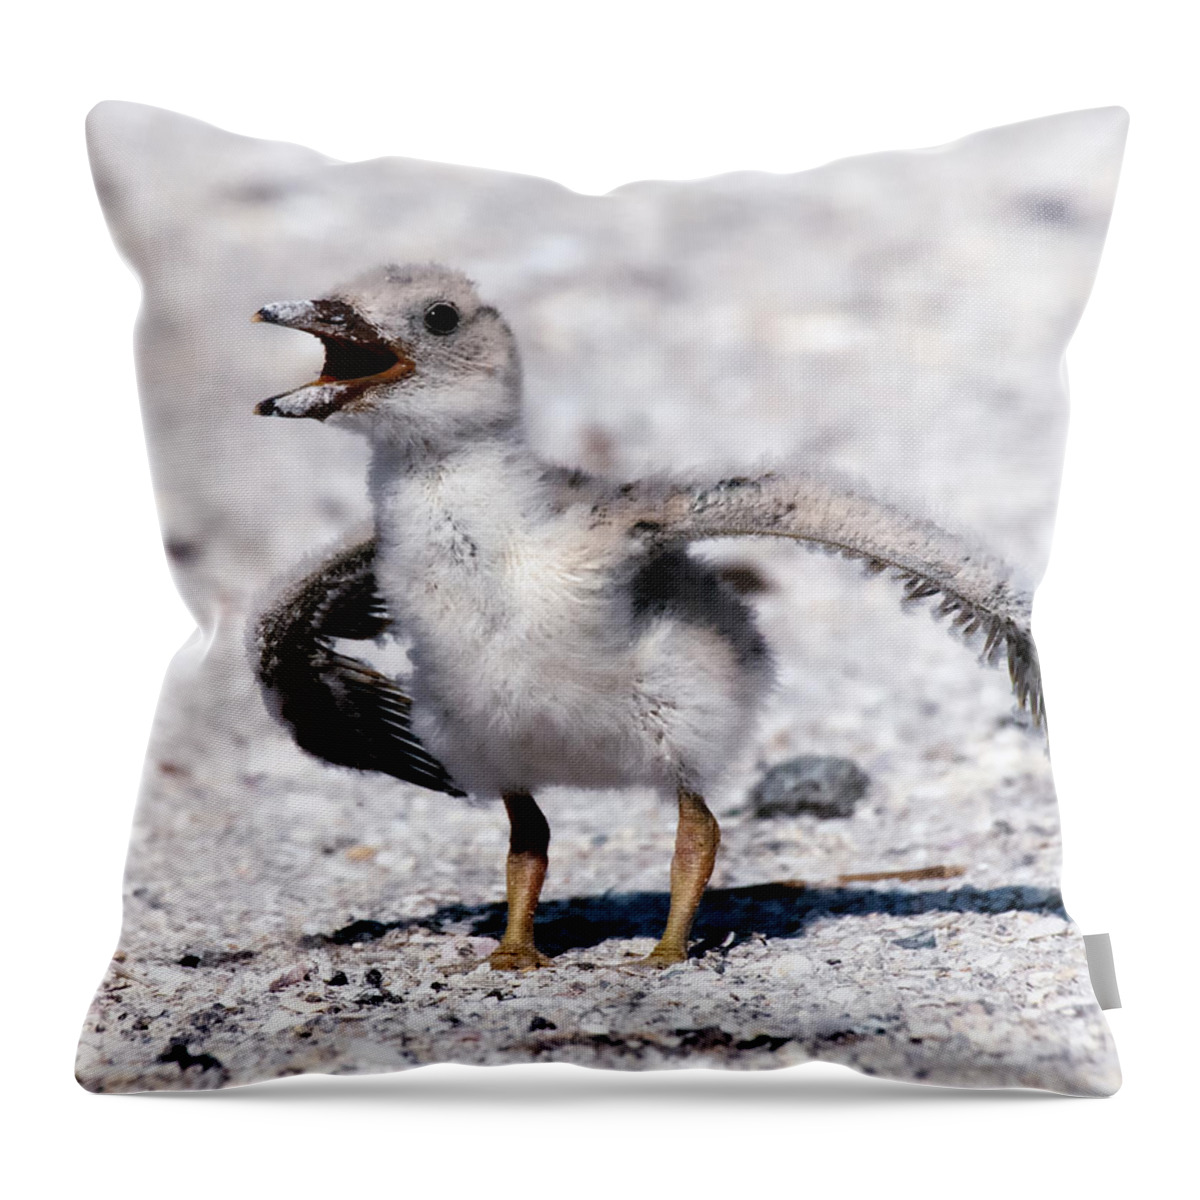 Crystal Yingling Throw Pillow featuring the photograph I am NOT a Baby by Ghostwinds Photography